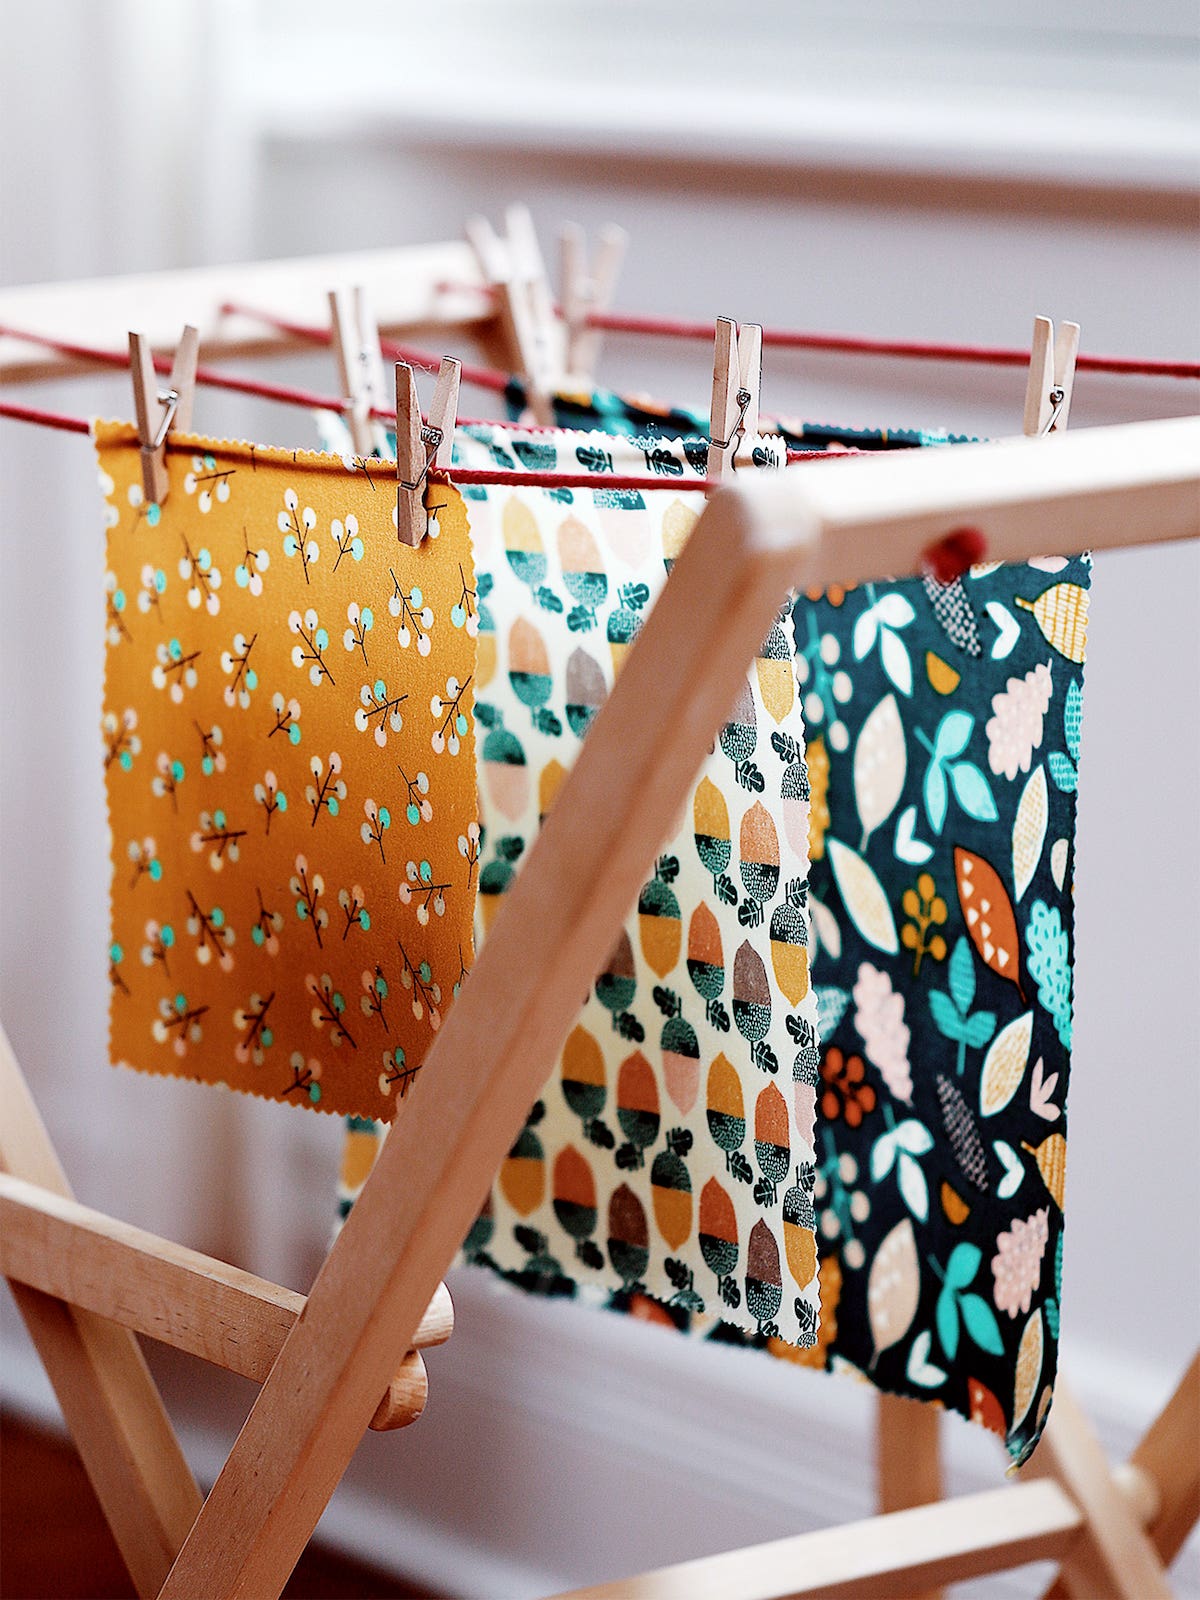 beeswax wraps drying